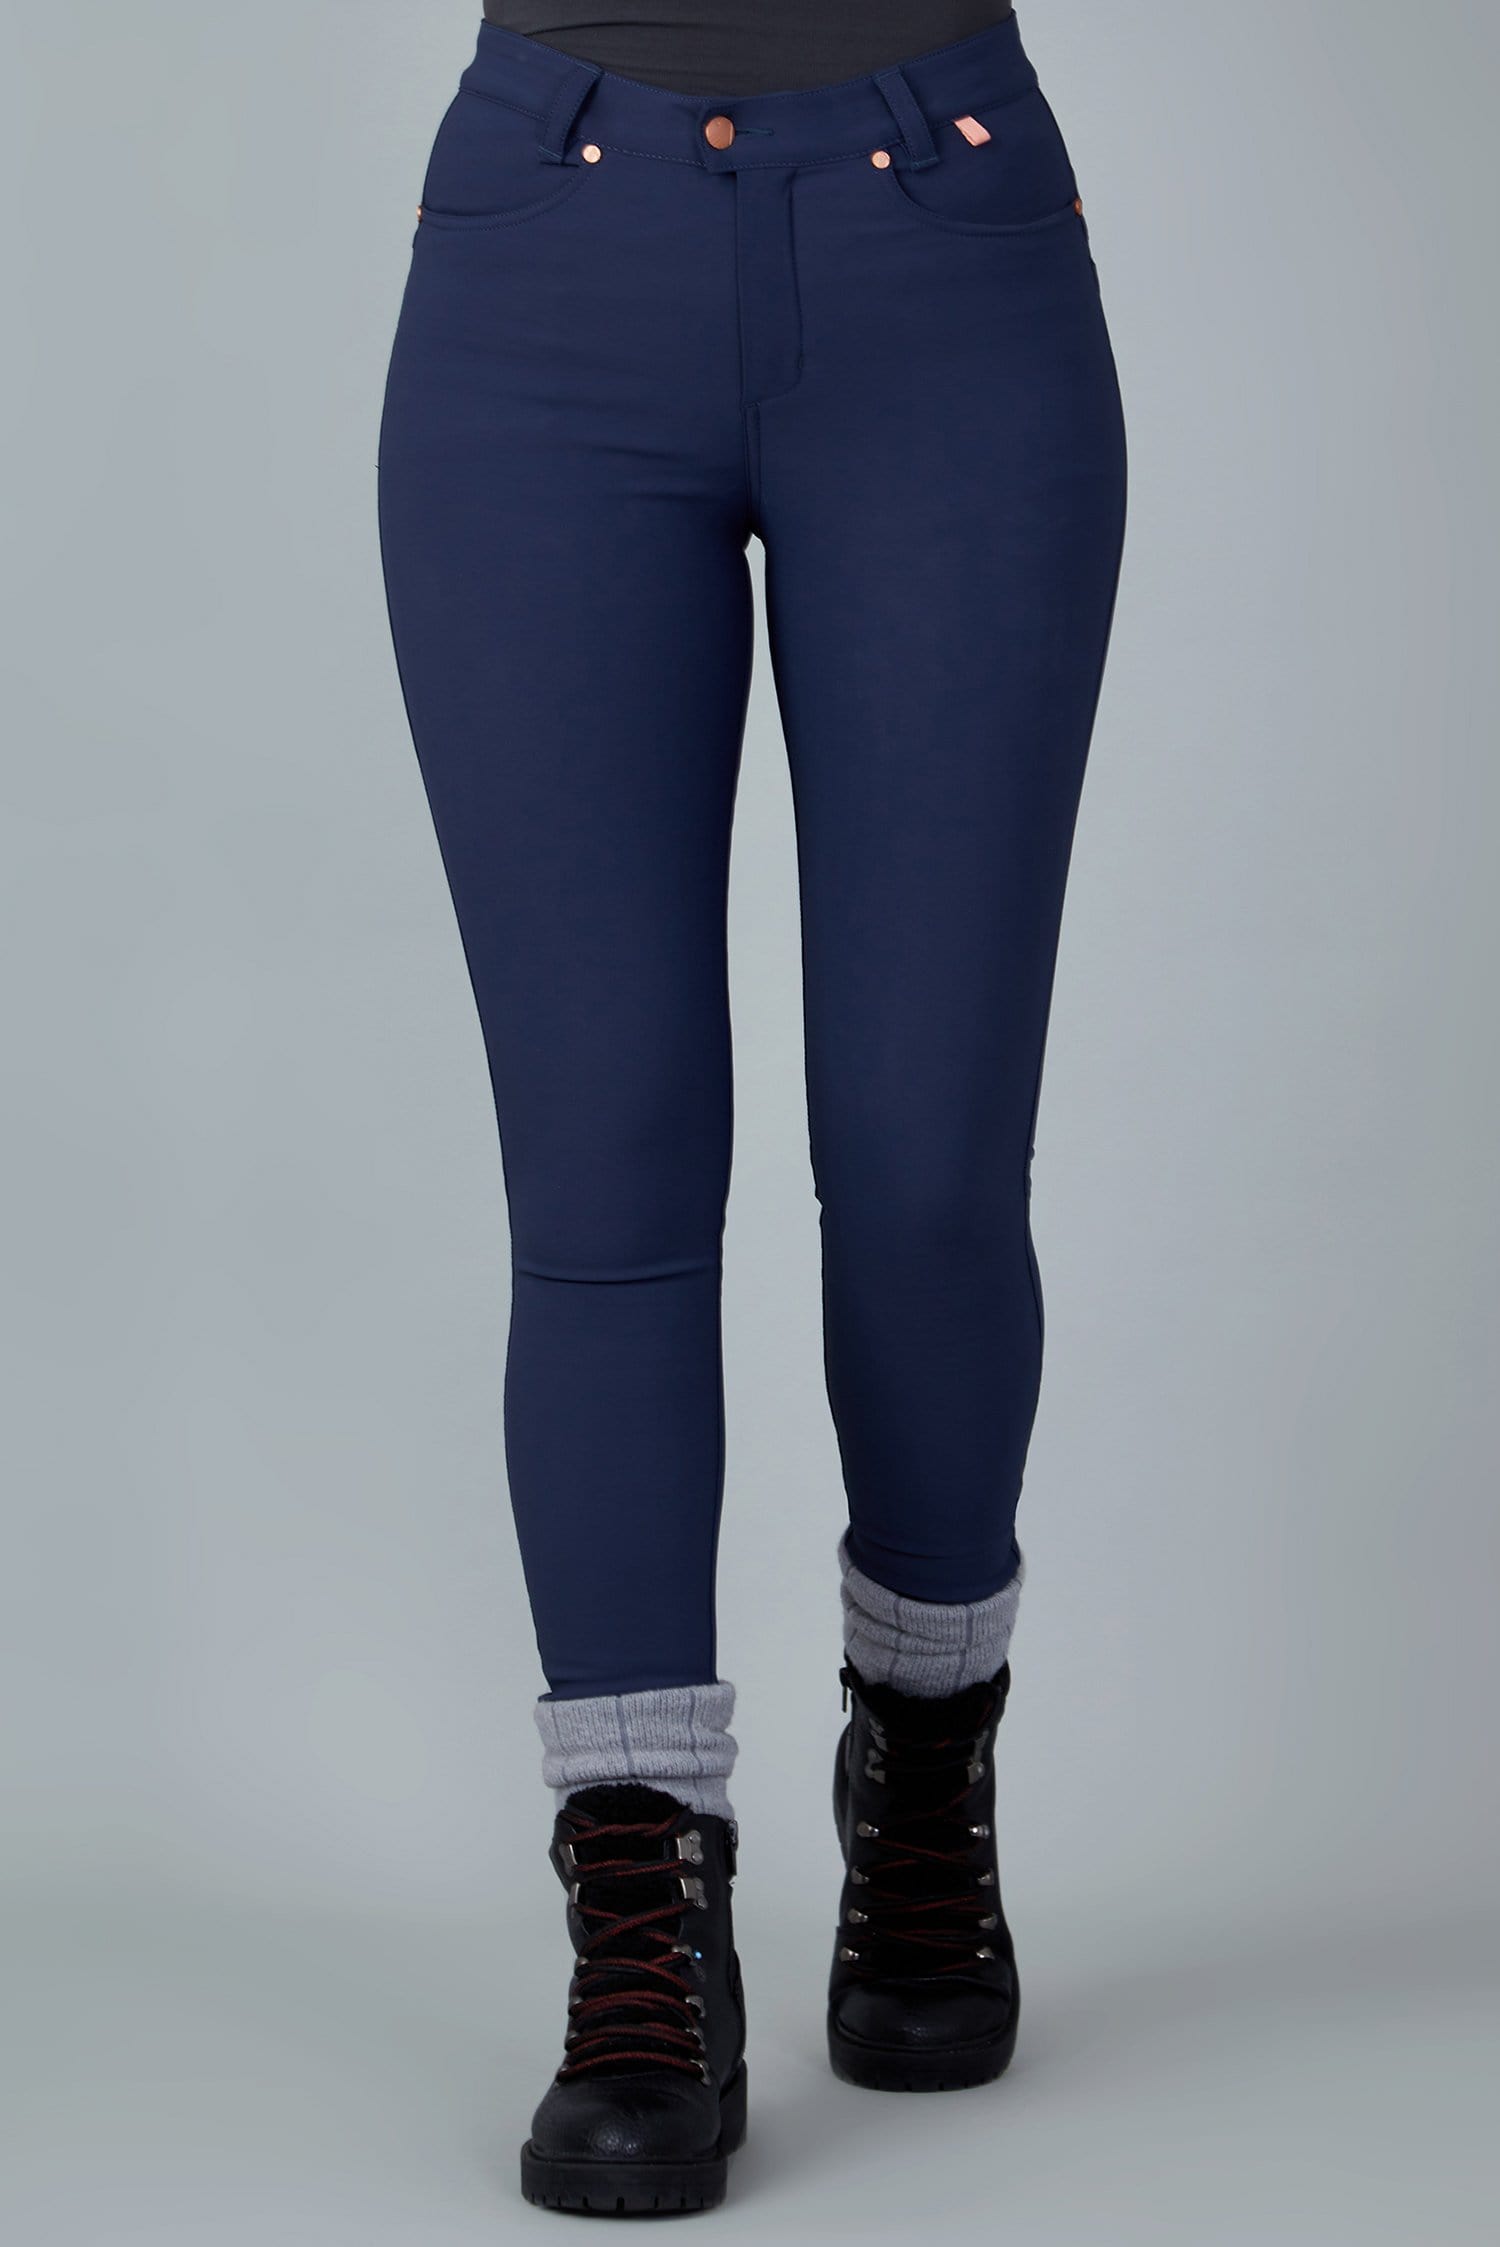 The Aventurite Stretch Skinny Outdoor Trousers - Midnight Blue - 36r / Uk18 - Womens - Acai Outdoorwear